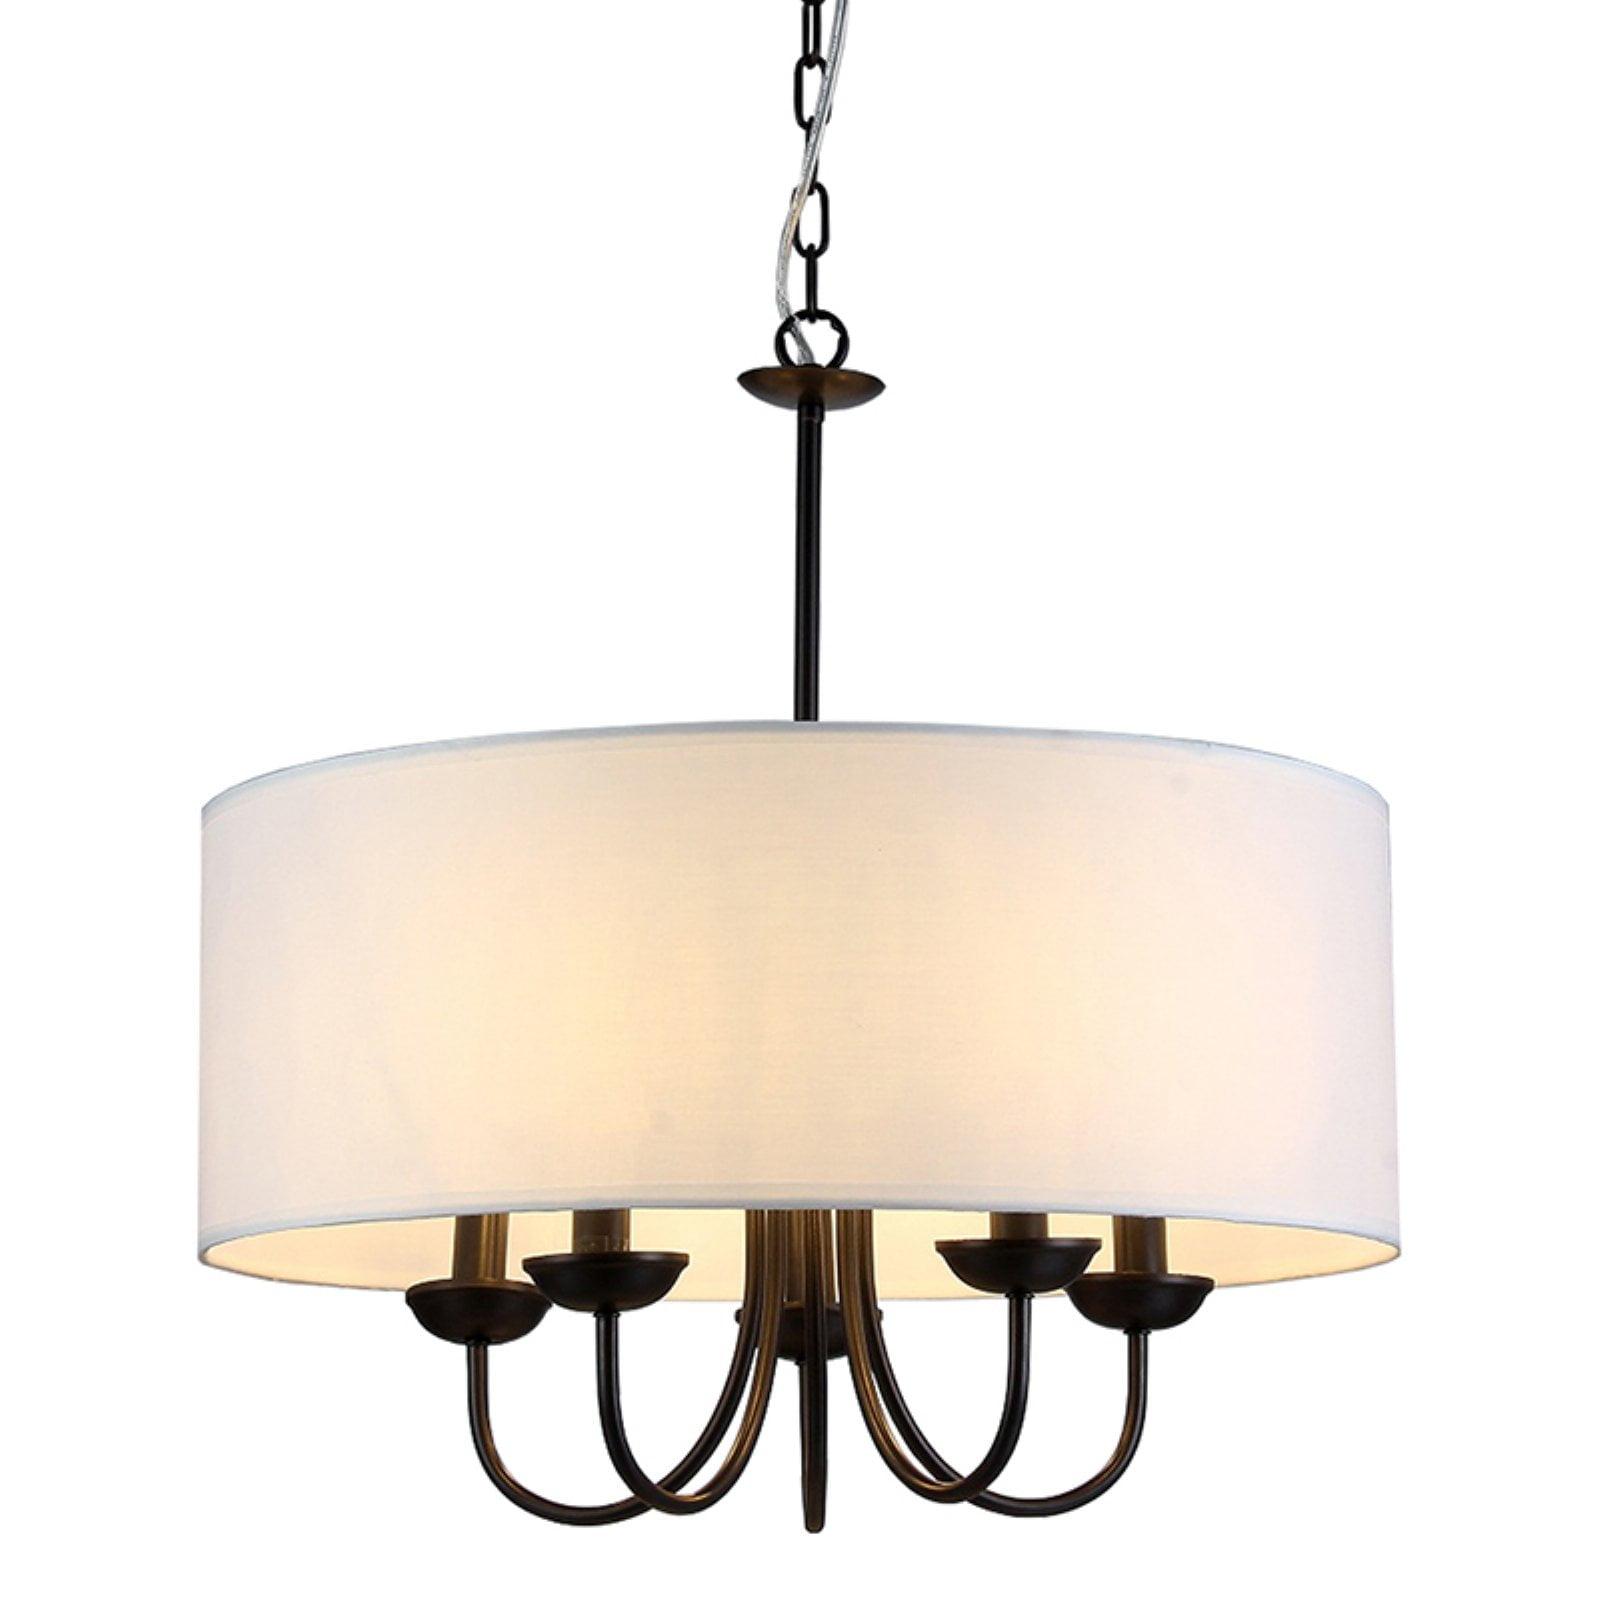 Gwenevere 22" Black Drum Chandelier with White Fabric Shade